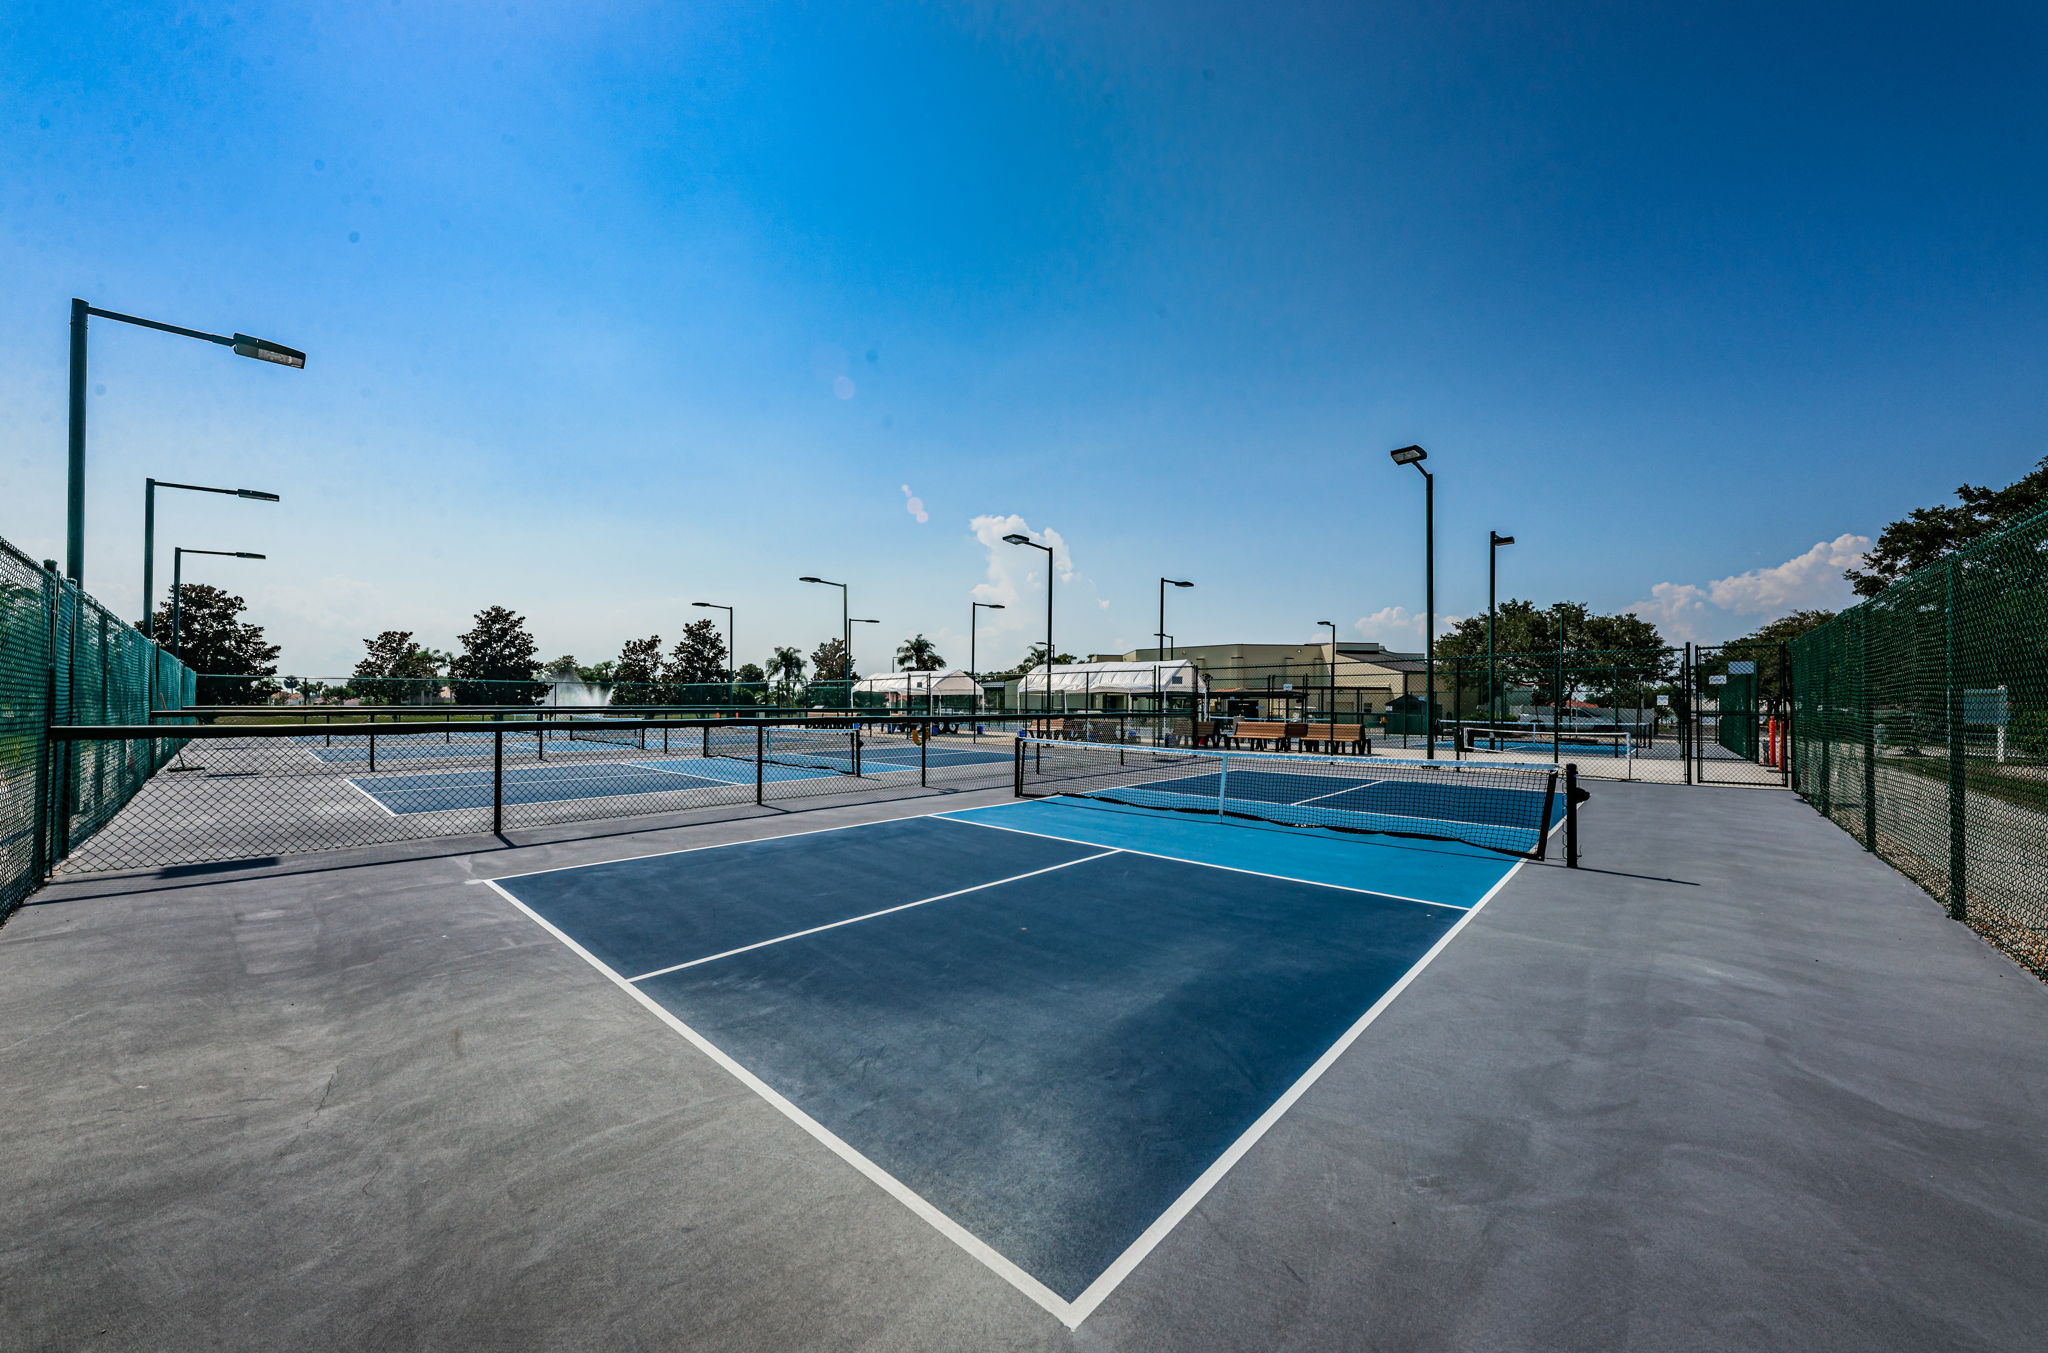 70-South Campus Pickleball Courts